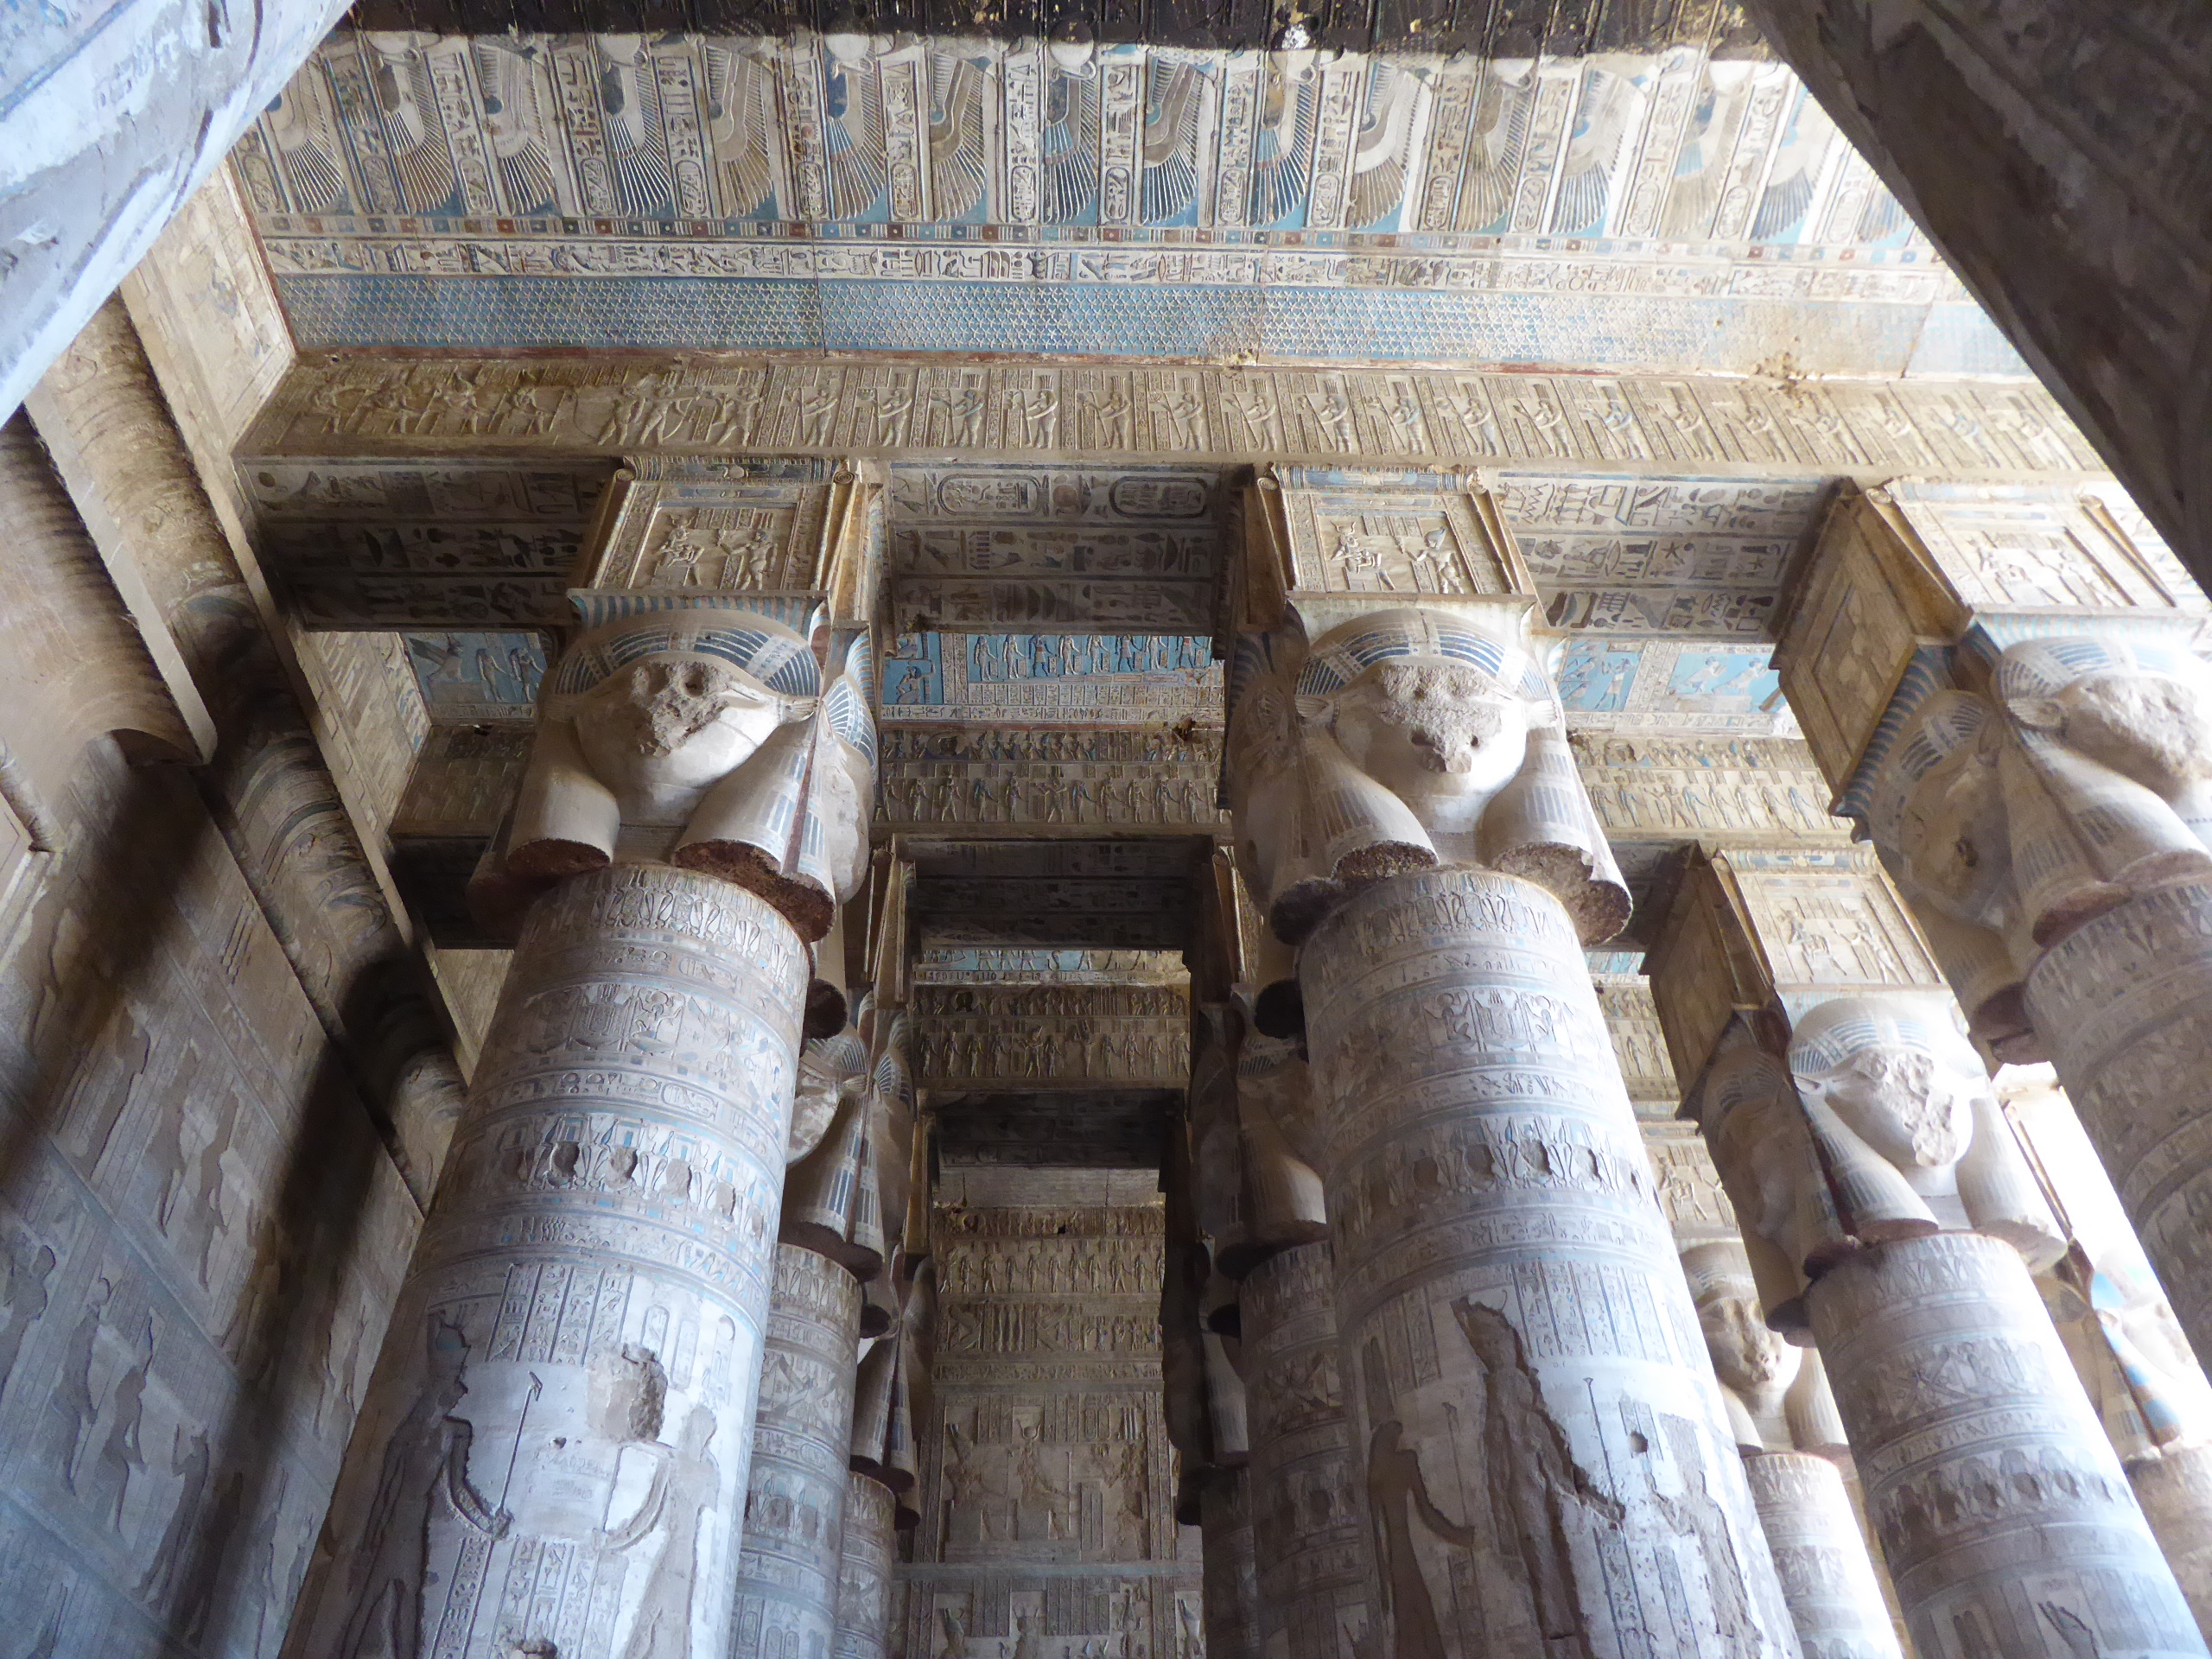 Temple of Hathor, Dendera The Temple of Hathor at Dendera is one of Egypt's best preserved and most beautiful ancient shrines. This magnificent edifice dates to the Ptolemaic period, late in Egyptian history, though the site long had been the cult centre for the goddess Hathor for centuries before (the earliest extant remains date to c360BC but a temple is recorded here as far back as c2250BC). Most of the main building dates to the reigns of the last Cleopatras and further decoration and building work within the complex continued in the Roman period up to the reign of Trajan. The dominant structure in the complex is the Temple of Hathor, an enormous structure with a rectangular facade punctuated by the Hathor-headed columns of the hypostyle hall within. This hall is an architectural wonder, a masterpiece of ancient Egyptian design and decoration, which covers every surface and has been recently cleaned, revealing a superb astrological ceiling in all its original vibrant colours. Sadly there was much iconoclasm here during the early Christian period and most of the reliefs of the walls and pillars have been defaced. Worse still is the damage to the 24 Hathor-head capitals: not one of the nearly a hundred huge faces of the goddess that once smiled down on this hall has been left unblemished, most with their features cruelly chiselled away. The main temple building is otherwise structurally intact, and extends into further halls and chapels beyond, again with much relief decoration (much of which is again defaced). In one corner is an entrance to a crypt below, an unusual feature in Egyptian temple architecture consisting of several narrow passages adorned with carved relief decoration in good condition. There are further sanctuaries and chapels above on the roof of the temple, accessed by a decorated staircase and including the room where the famous Dendera Zodiac was formerly located (today its place in the ceiling taken by a cast of the original, now displayed in Paris). The highest part of the roof complex is no longer accessible to tourists, but I can still recall making the ascent there on our first visit in 1992. Several other buildings surround the main temple, the most impressive of which is the mammisi or 'birth-house'. This consists of a large rectangluar hall surrounded by a colonnade near the entrance to the site and has some well preserved relief decoration on its exterior. Most of this structure dates to the Roman period, but the ruins of its predecessor built under Nectanebo II (Egypt's last native pharoah) stand nearby. Dendera temple is one of the most rewarding in Egypt and shouldn't be missed. It is one of the most complete and evocative ancient monuments in the country and its recent restoration has revealed a surprisingly extensive amount of colour surviving within (we were amazed by the dramatic contrast with the soot-blackened ceiling we'd beheld on our previous visit in the 1990s). Despite its relative youth (in Egyptian terms at least!) it is easily one of my favourite sites in Egypt. en.wikipedia.org/wiki/Dendera_Temple_complex